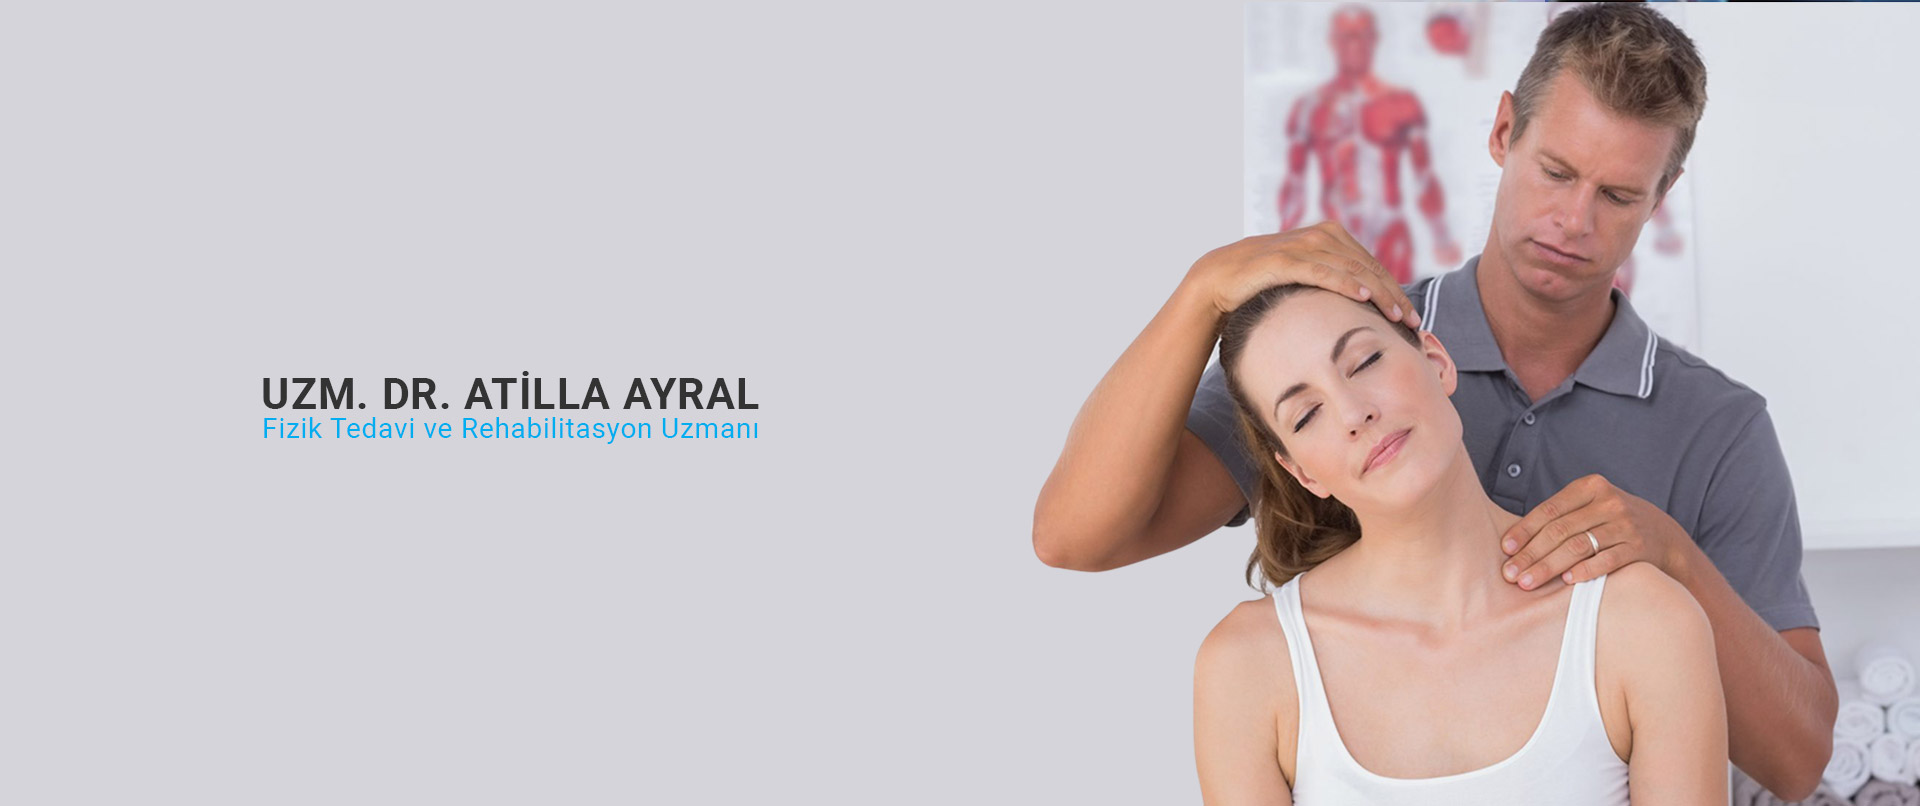 M.D. Physical Therapy and  Rehabilitation Specialist Atilla Ayral